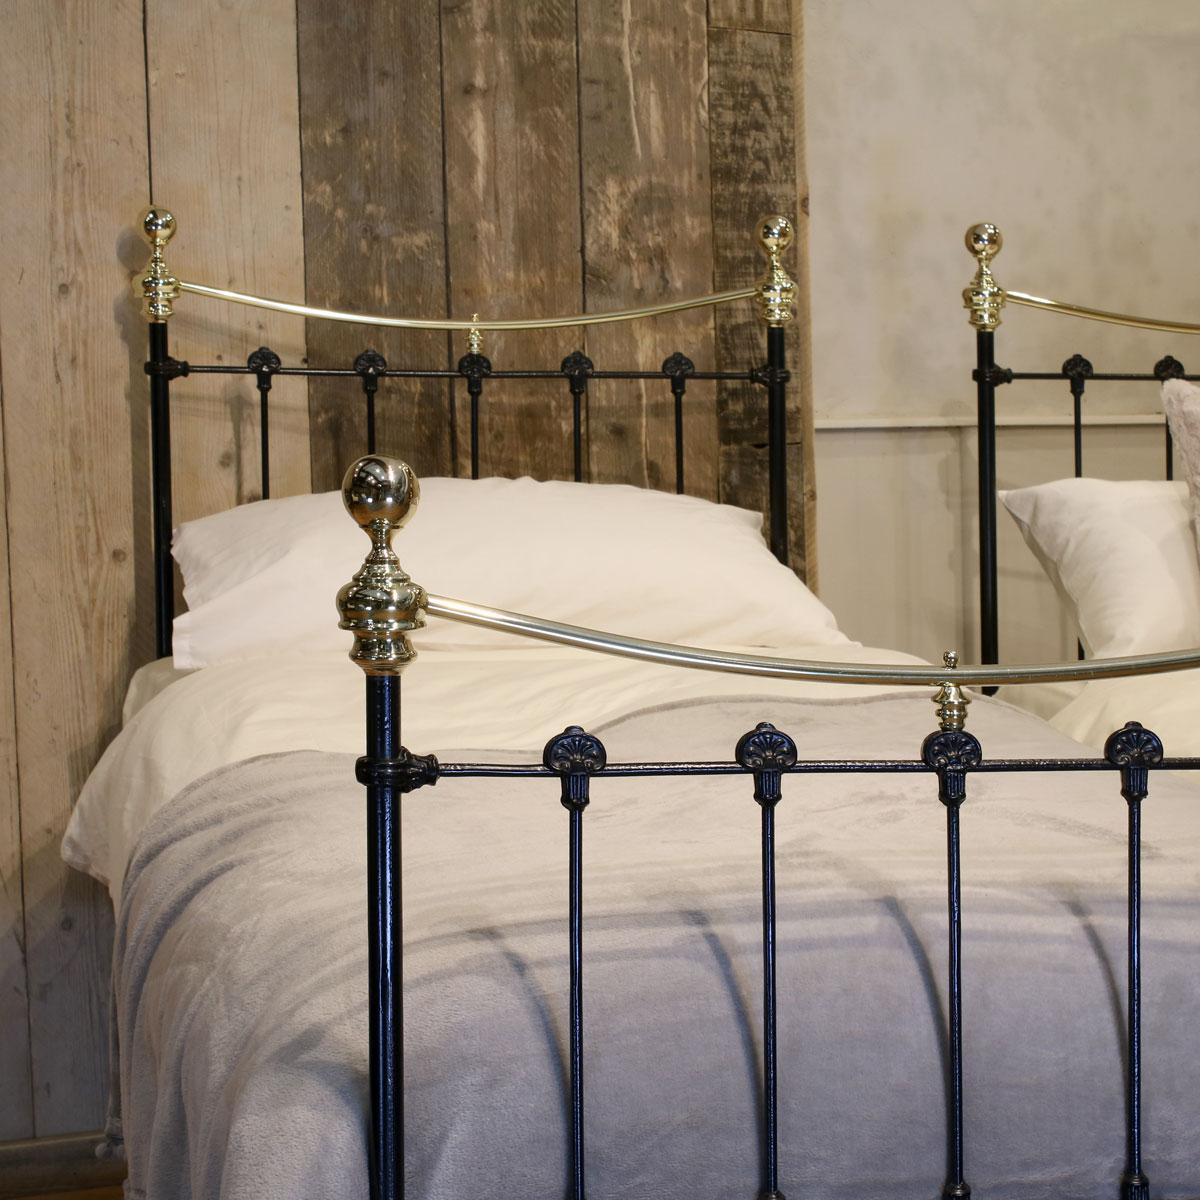 A matching pair of twin brass and iron beds finished in black with curved brass top rails.

These beds accept 3ft wide (36 inch or 90 cm) bases and mattresses.

The length can be 75 inches, 78 inches or more if required.

These beds can be